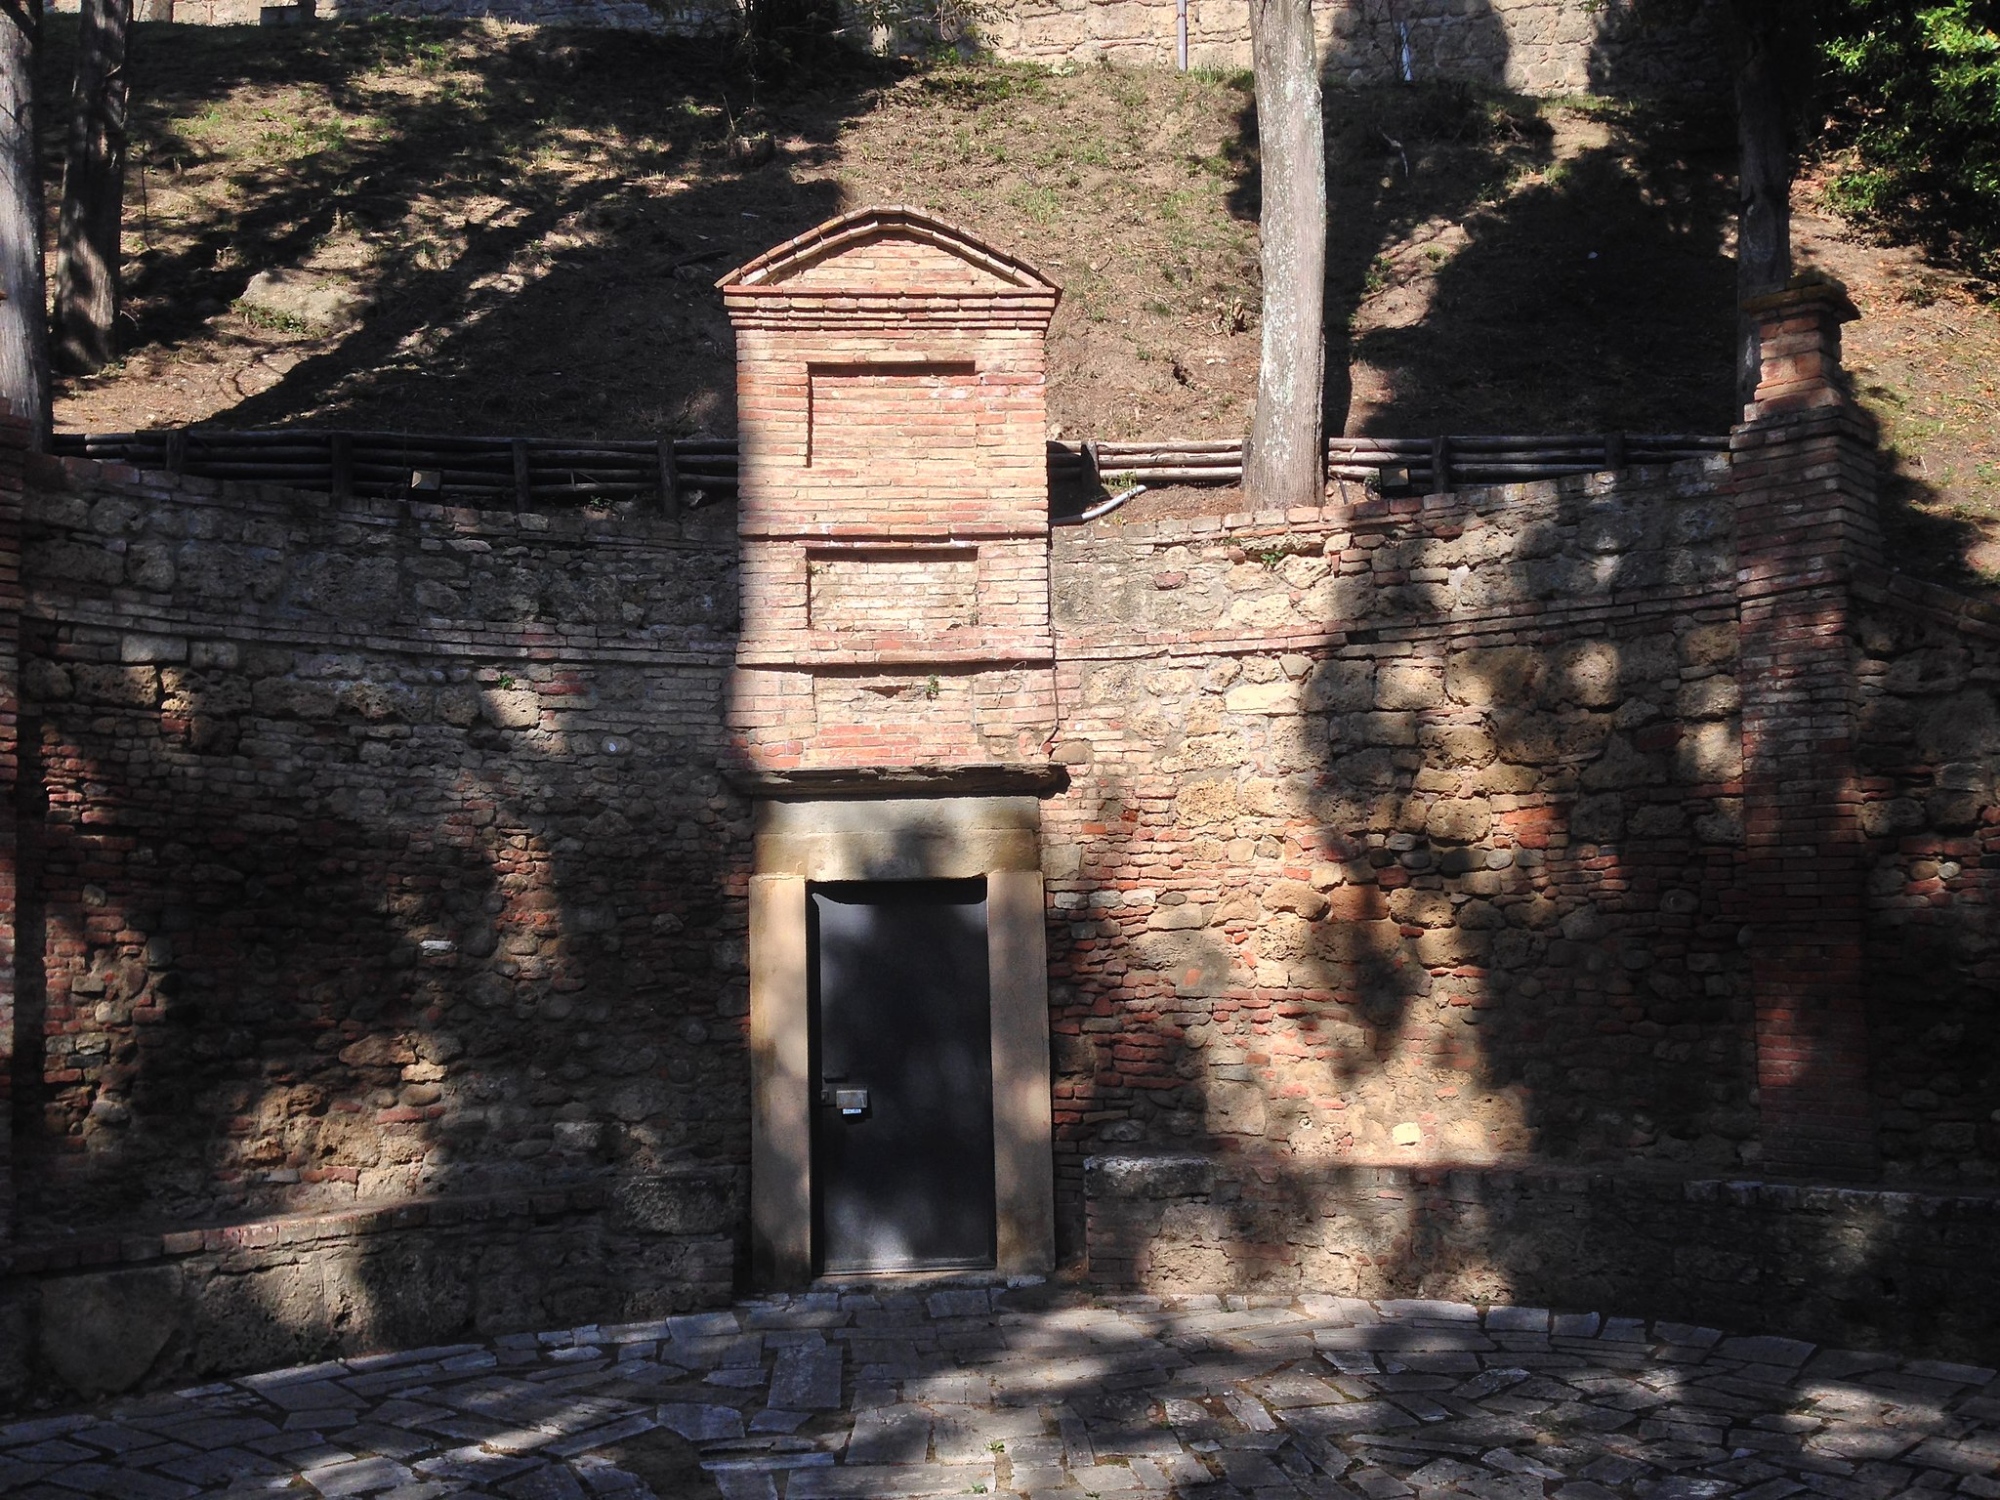 Entrance to the Catacomb of Santa Mustiola in Chiusi